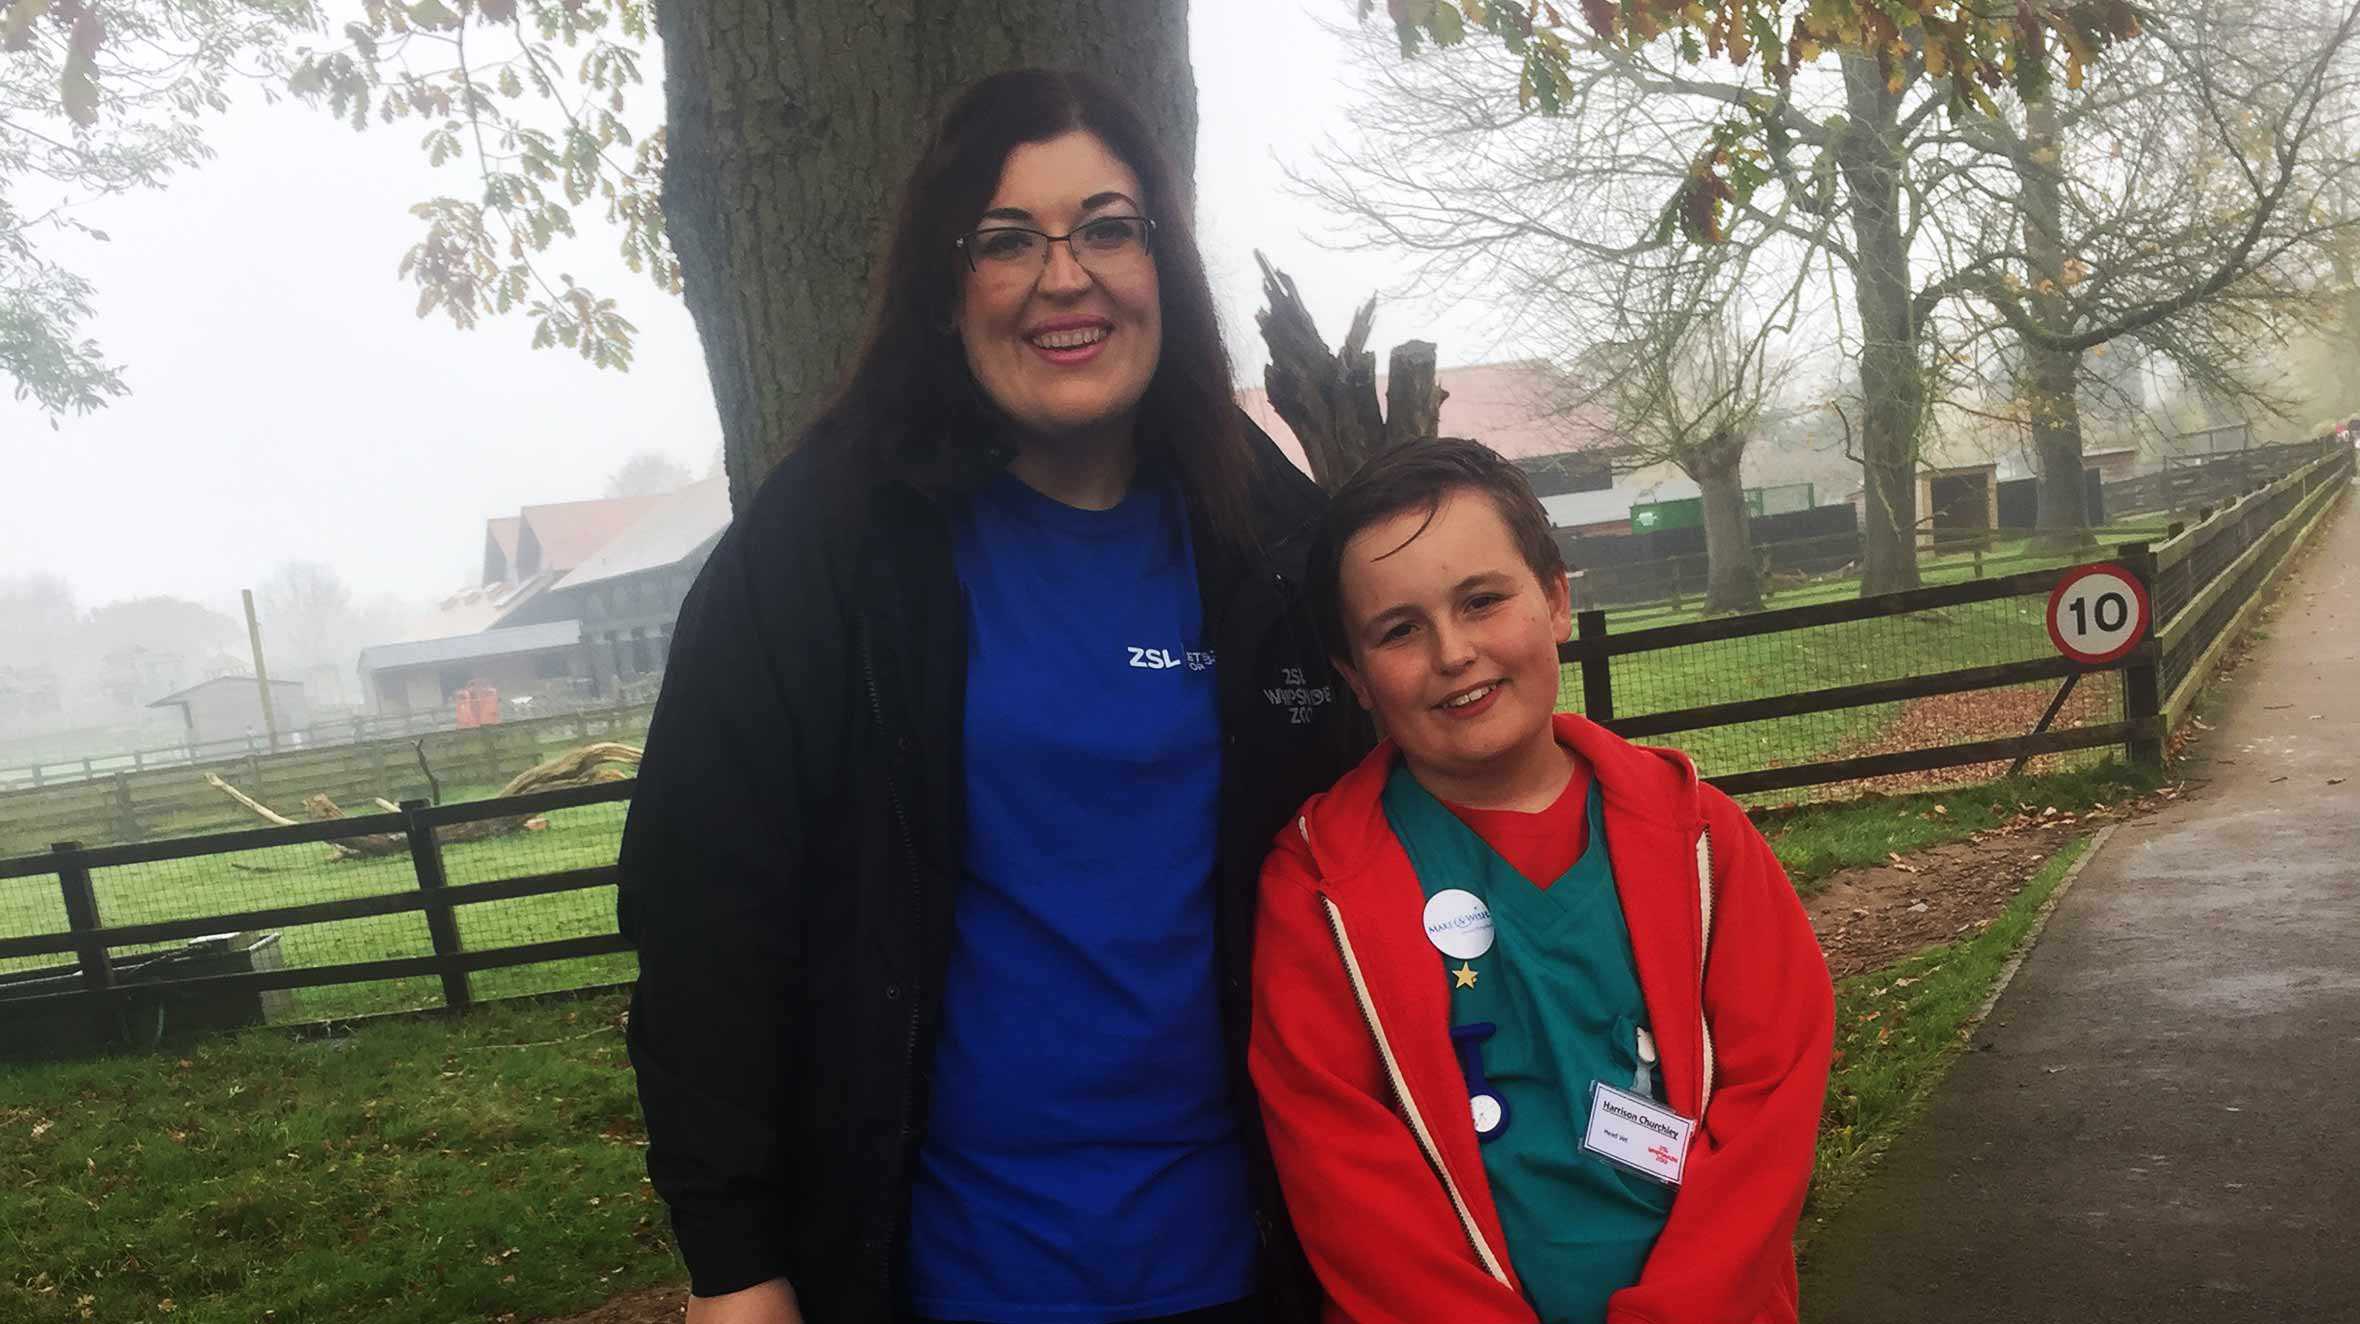 Harrison and and a member of zoo's team posing in a glade of trees at Whipsnade Zoo during his wish.